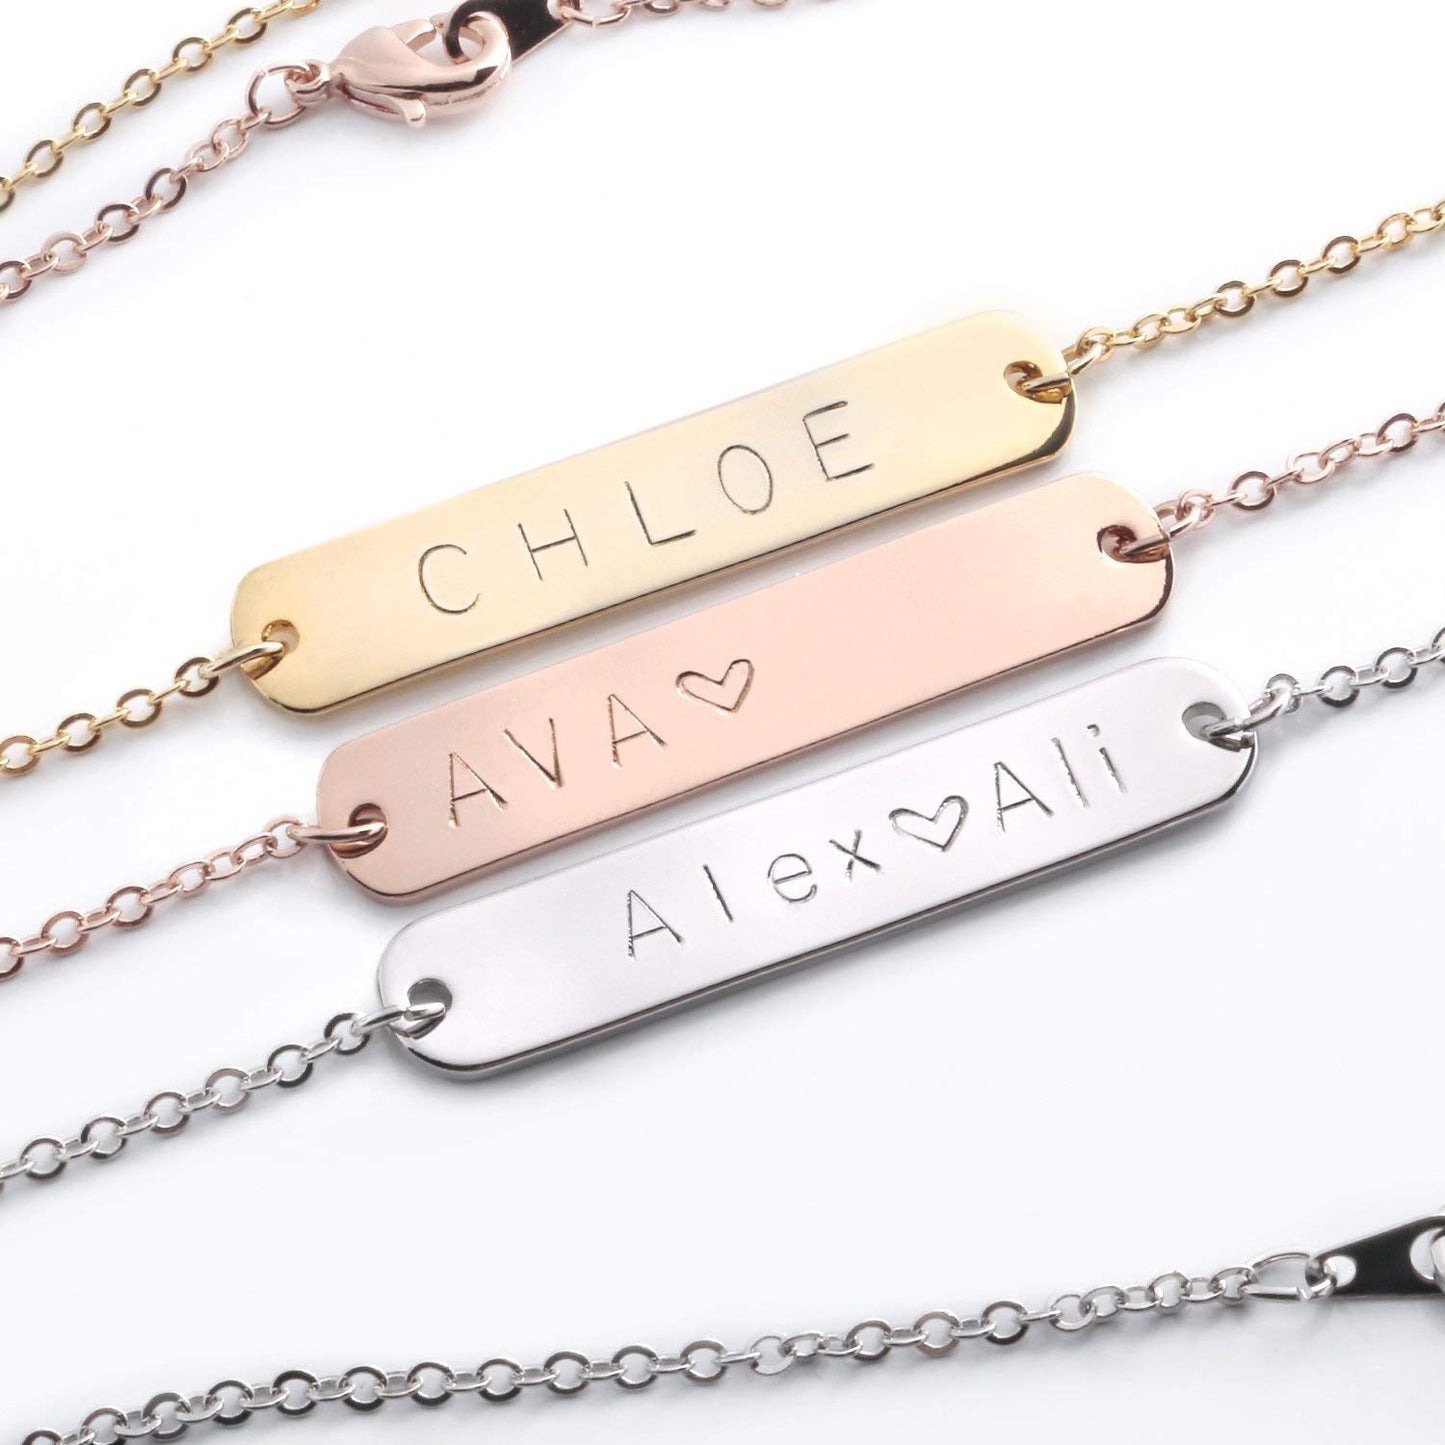 Custom Nameplate Necklace With design fonts